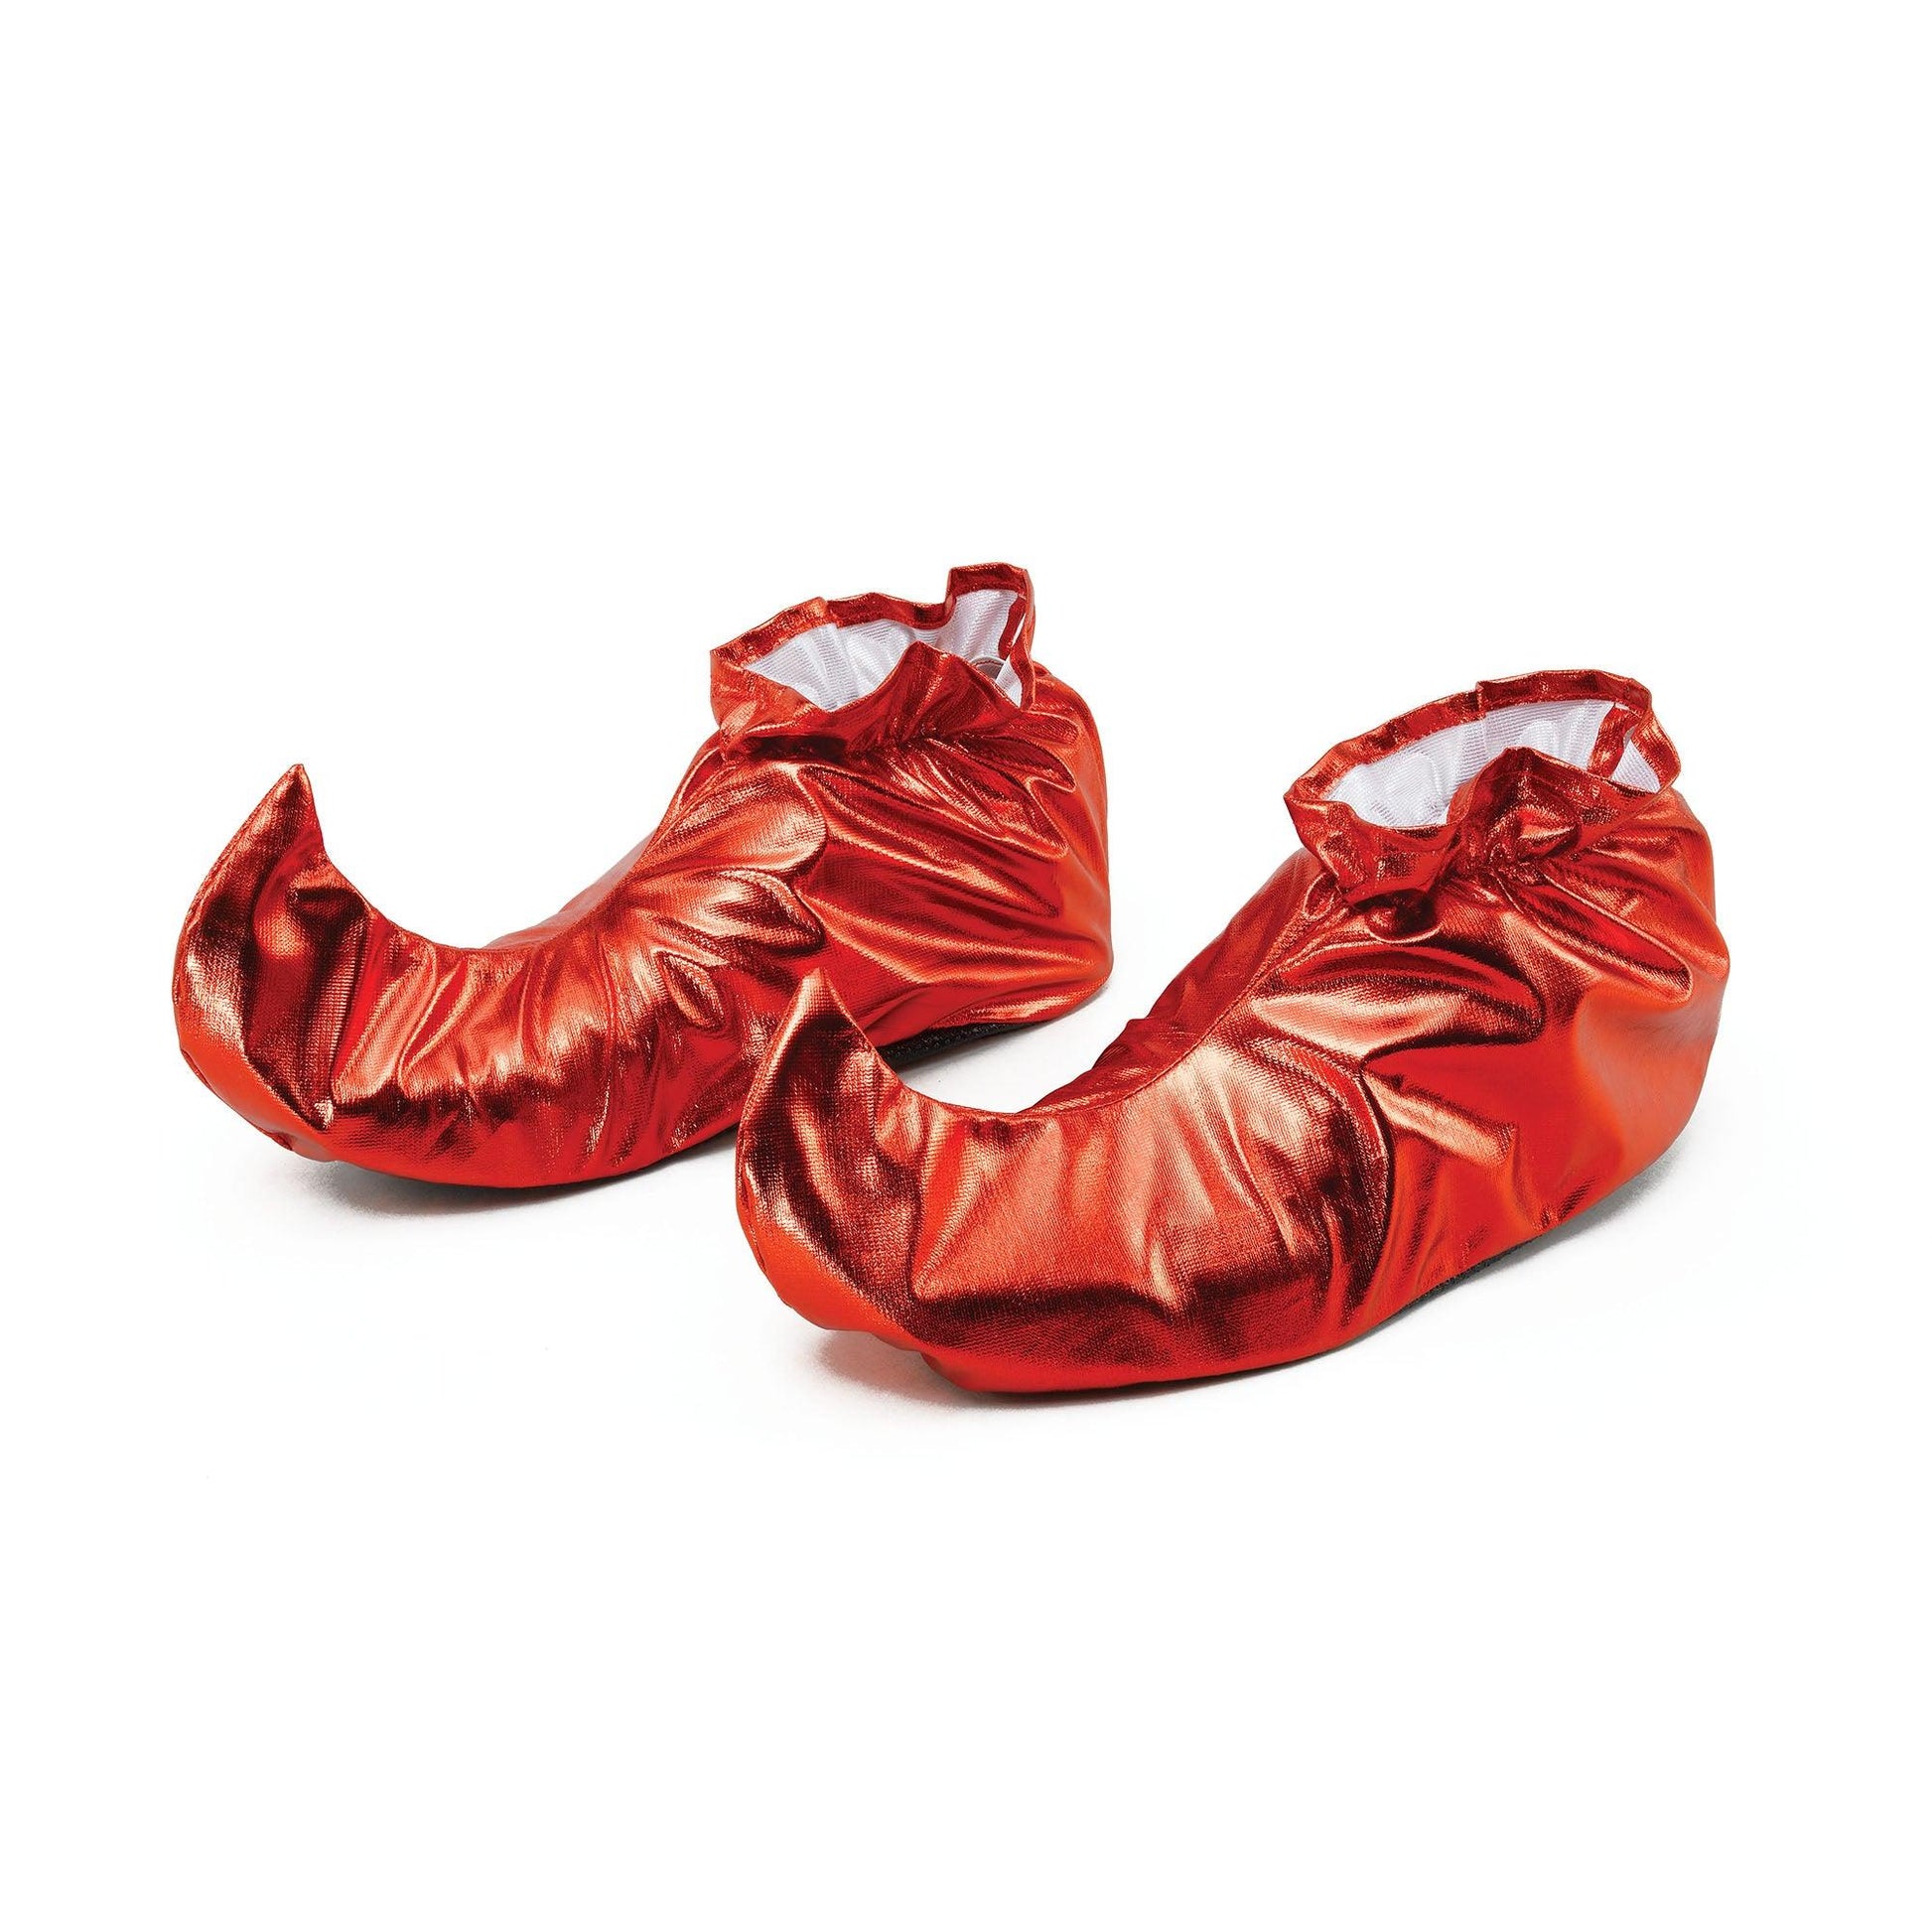 Jester Shoe Covers Red Metallic - Labreeze